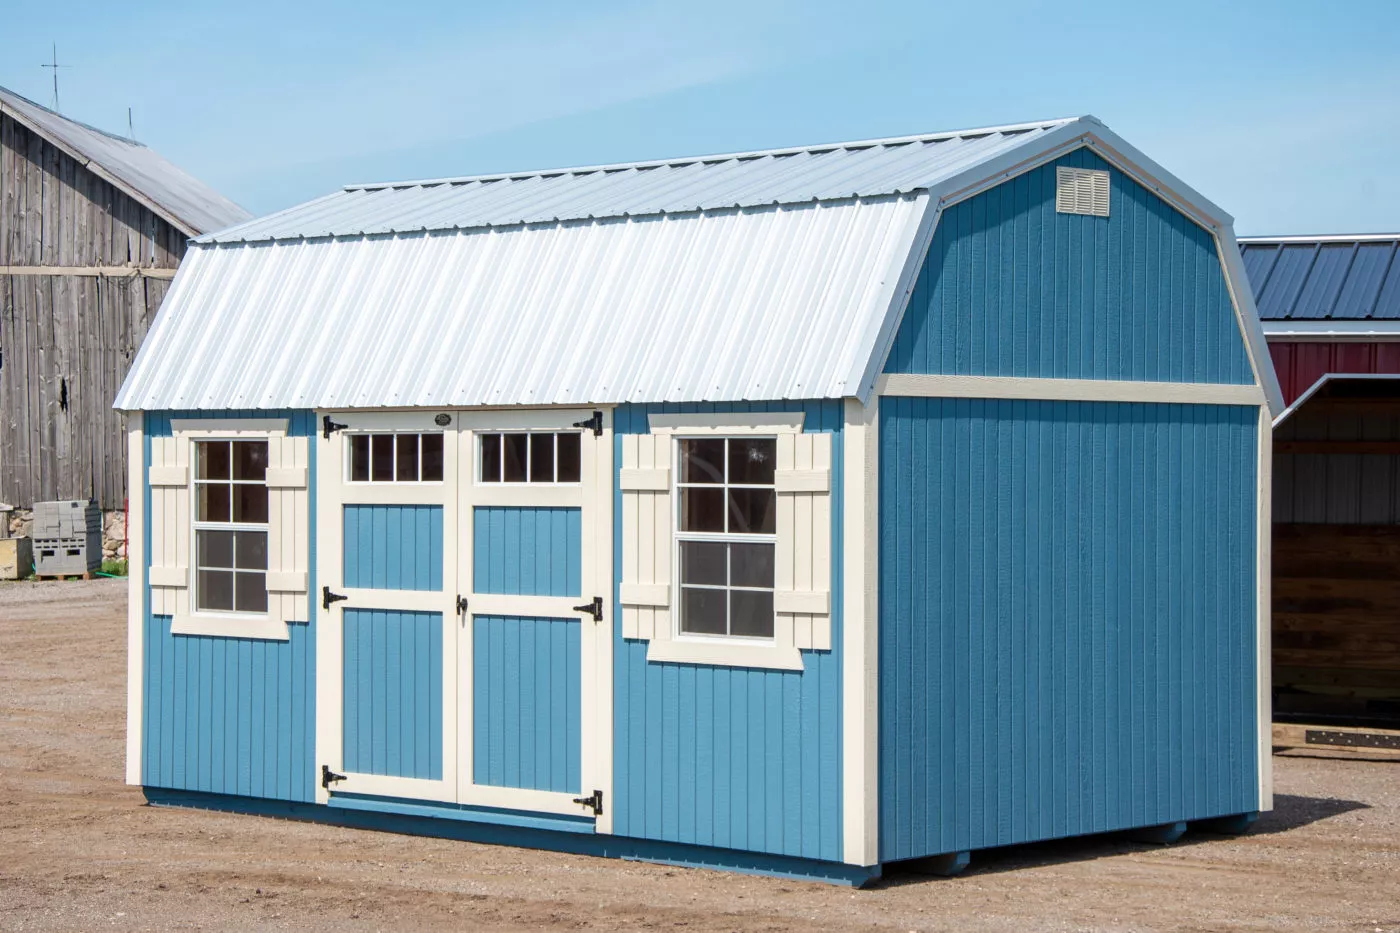 Lofted Garden Sheds For Sale In Sears, Michigan